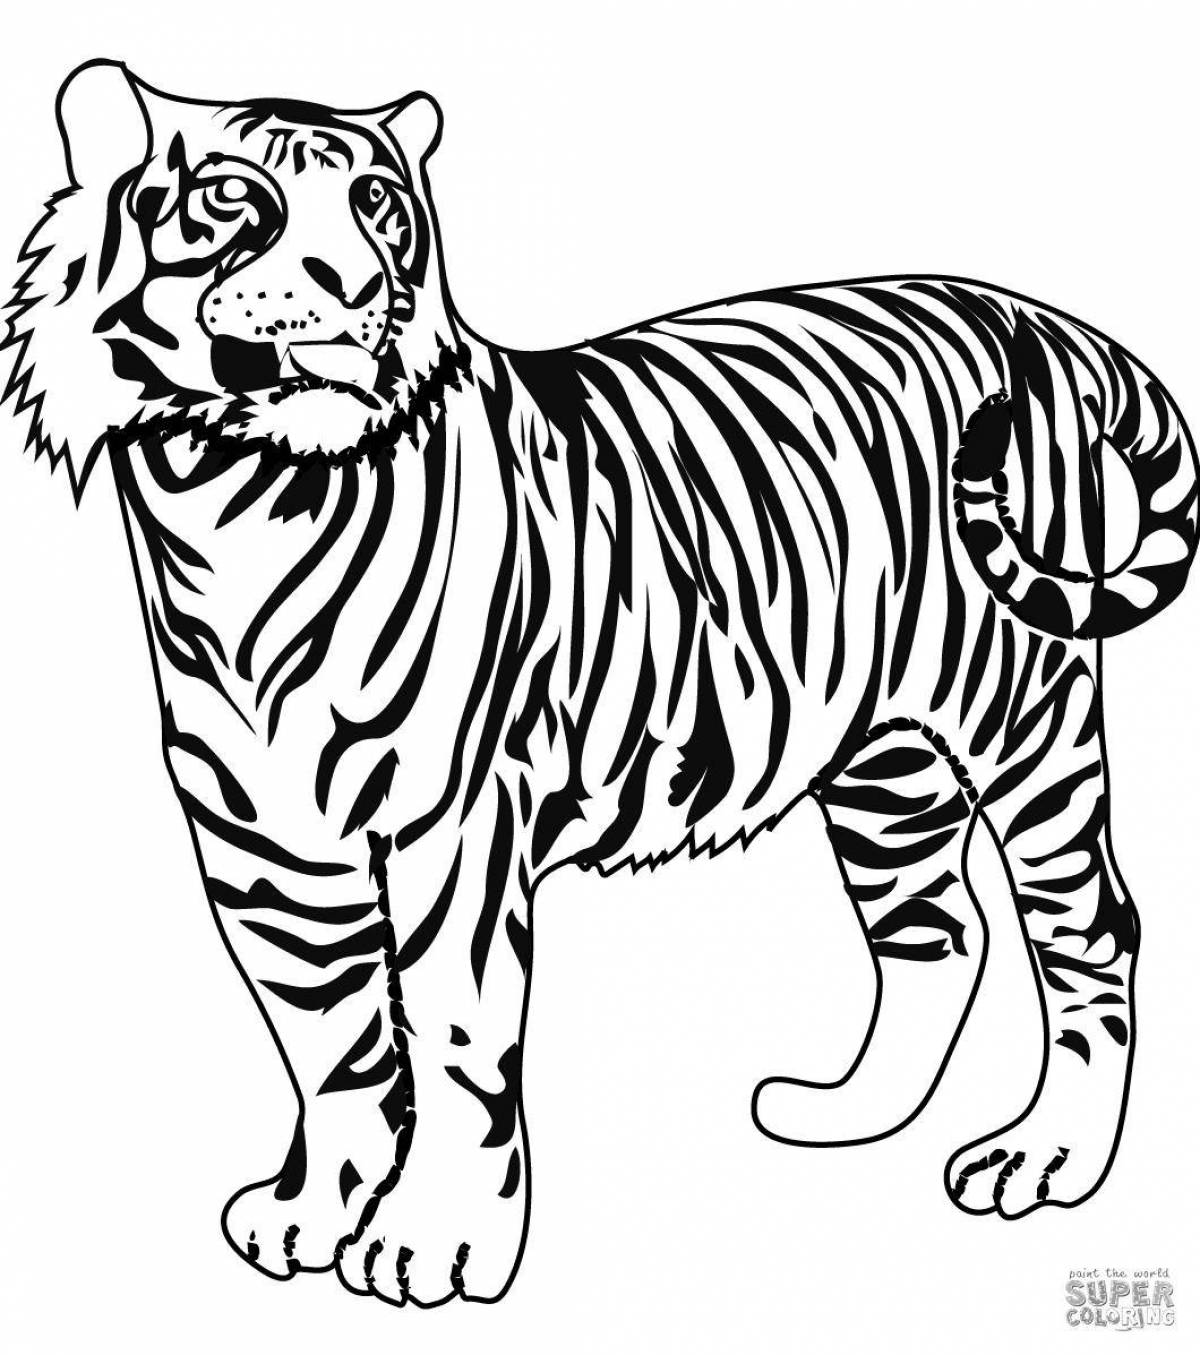 Fat tiger coloring book for 3-4 year olds